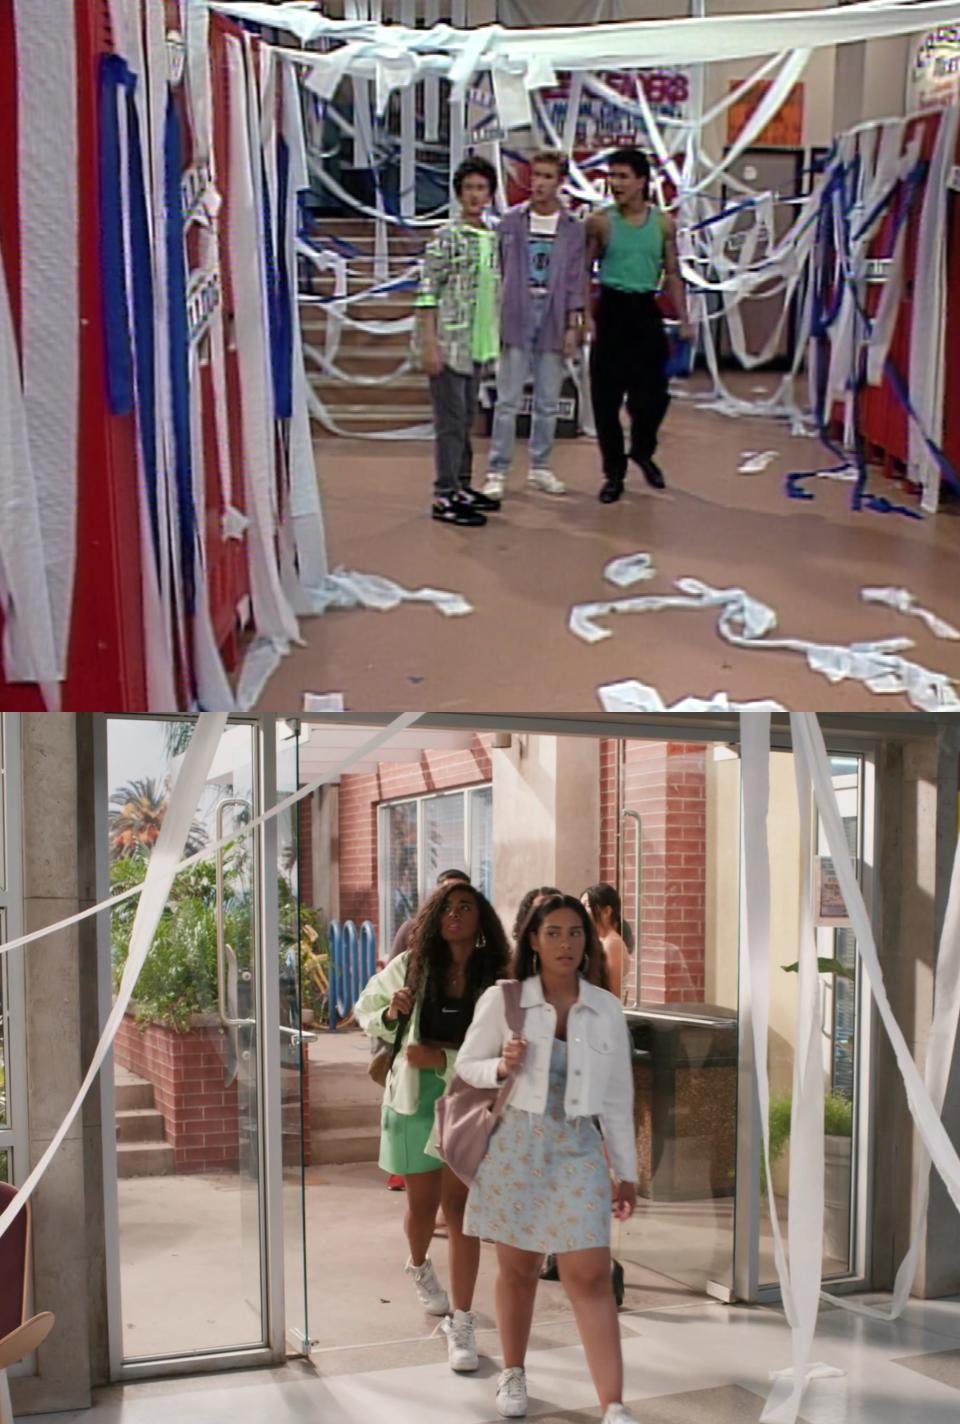 Saved by the Bell prank wars